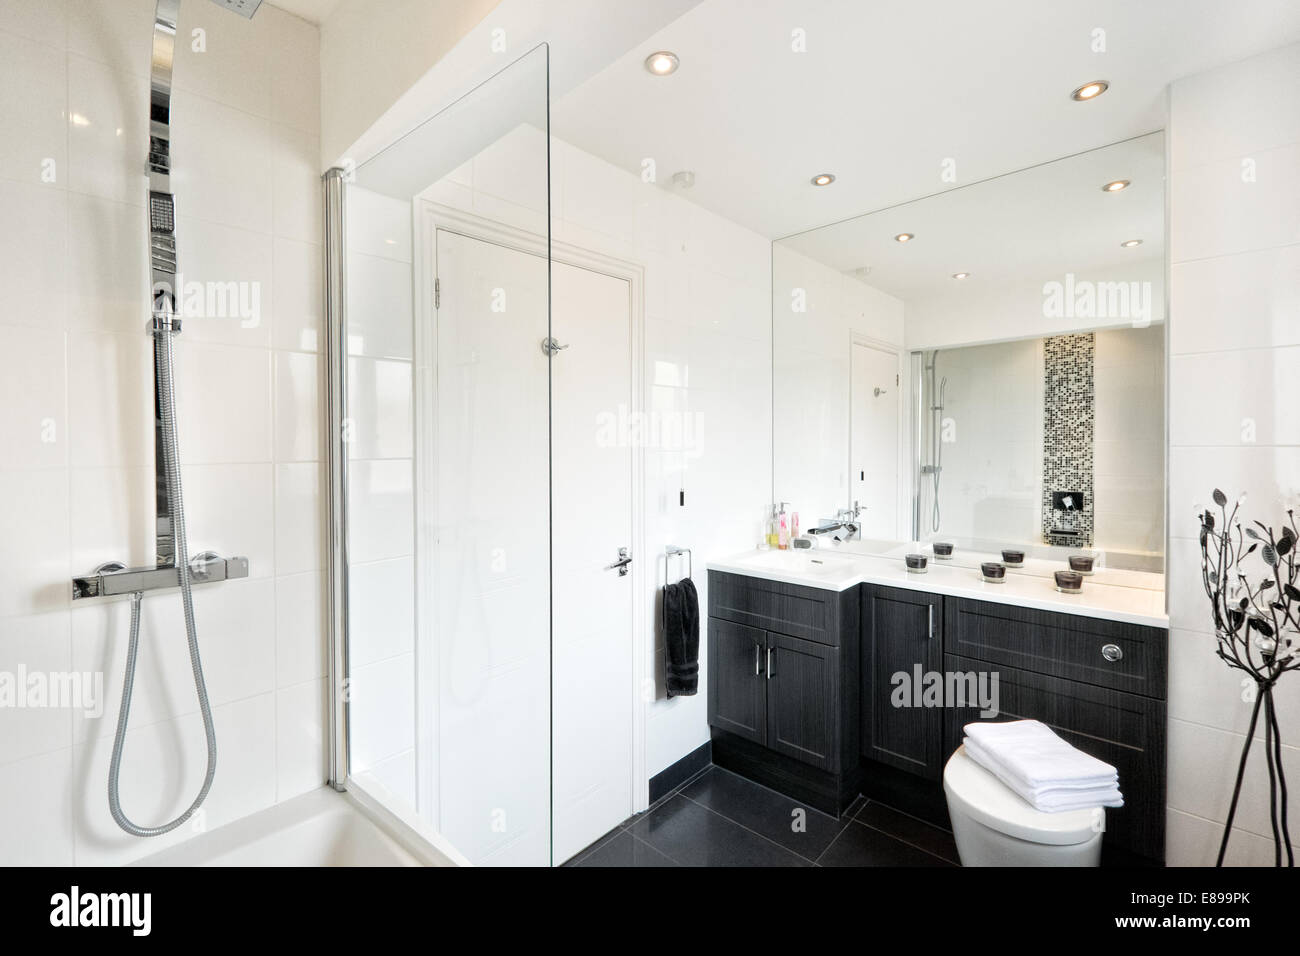 A contemporary bathroom in a modern UK home with fitted units & chrome fittings Stock Photo